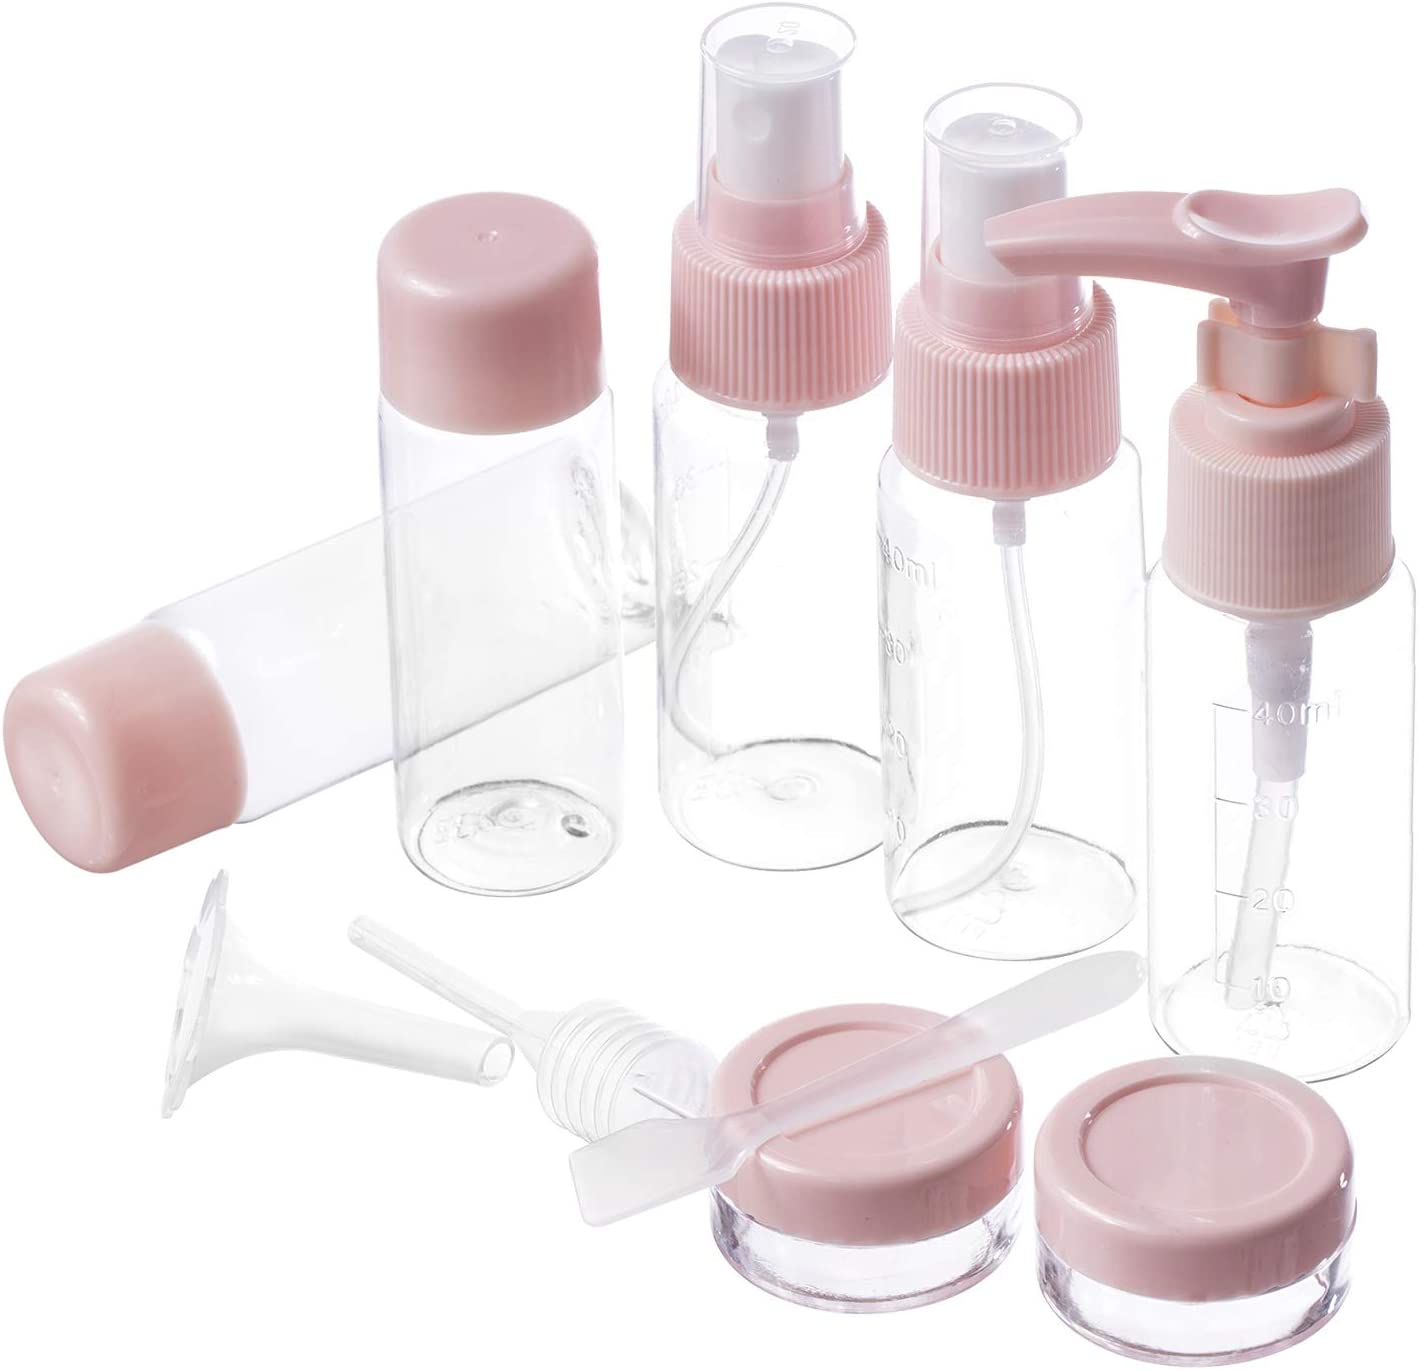 Travel Bottles Kit Leak Proof Portable Toiletry Containers Set, Clear  for Lotion, Shampoo, Cream, Soap, Set of 7